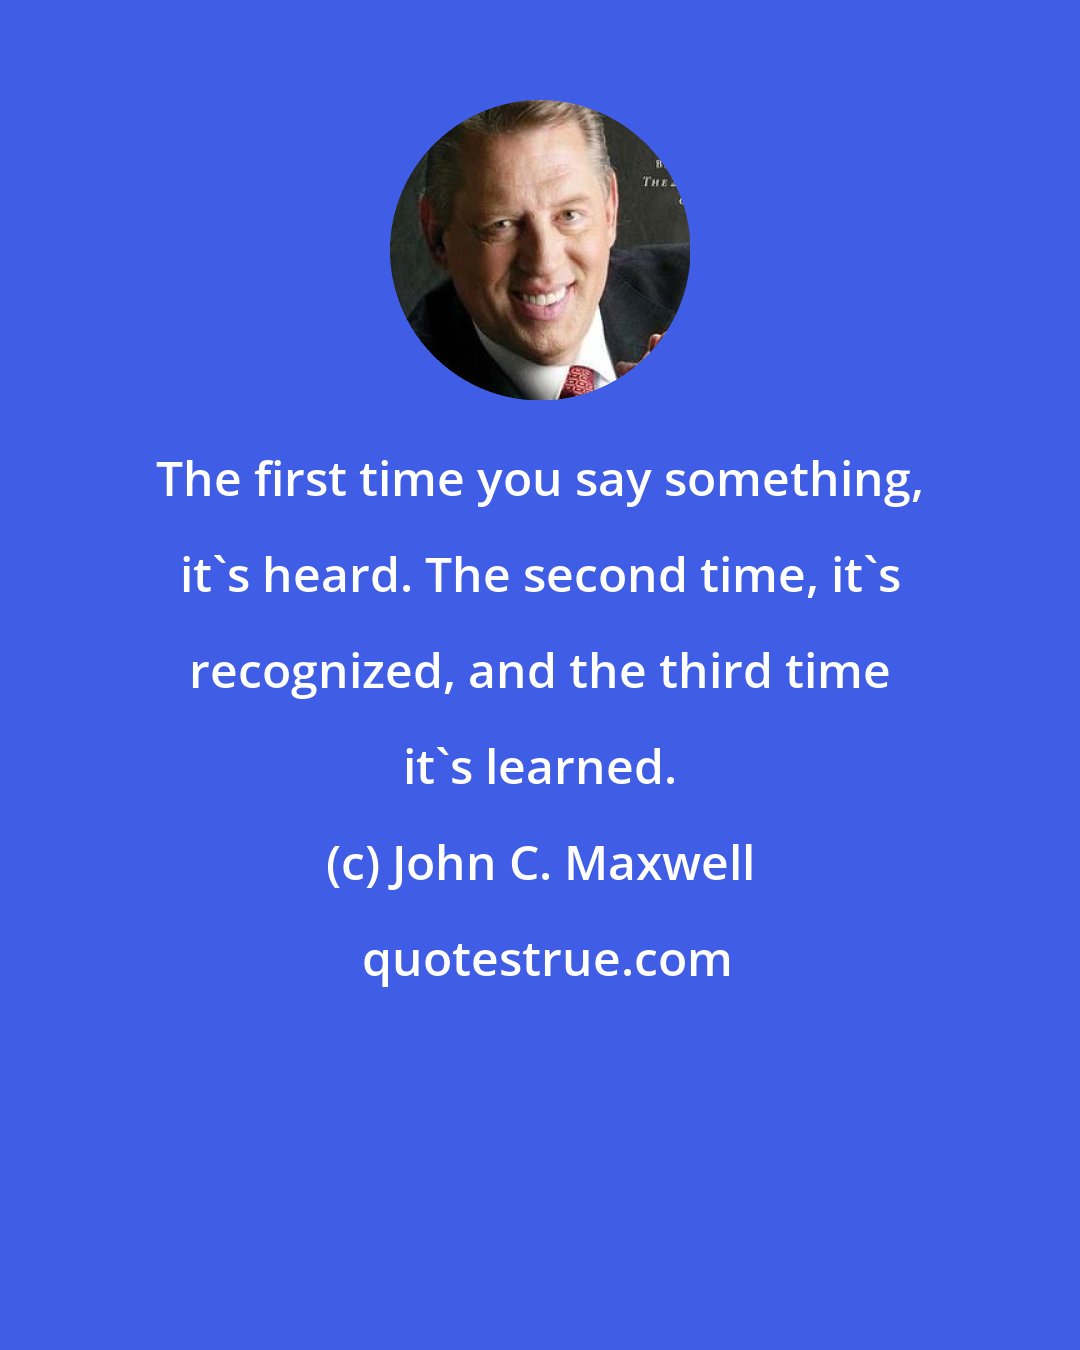 John C. Maxwell: The first time you say something, it's heard. The second time, it's recognized, and the third time it's learned.